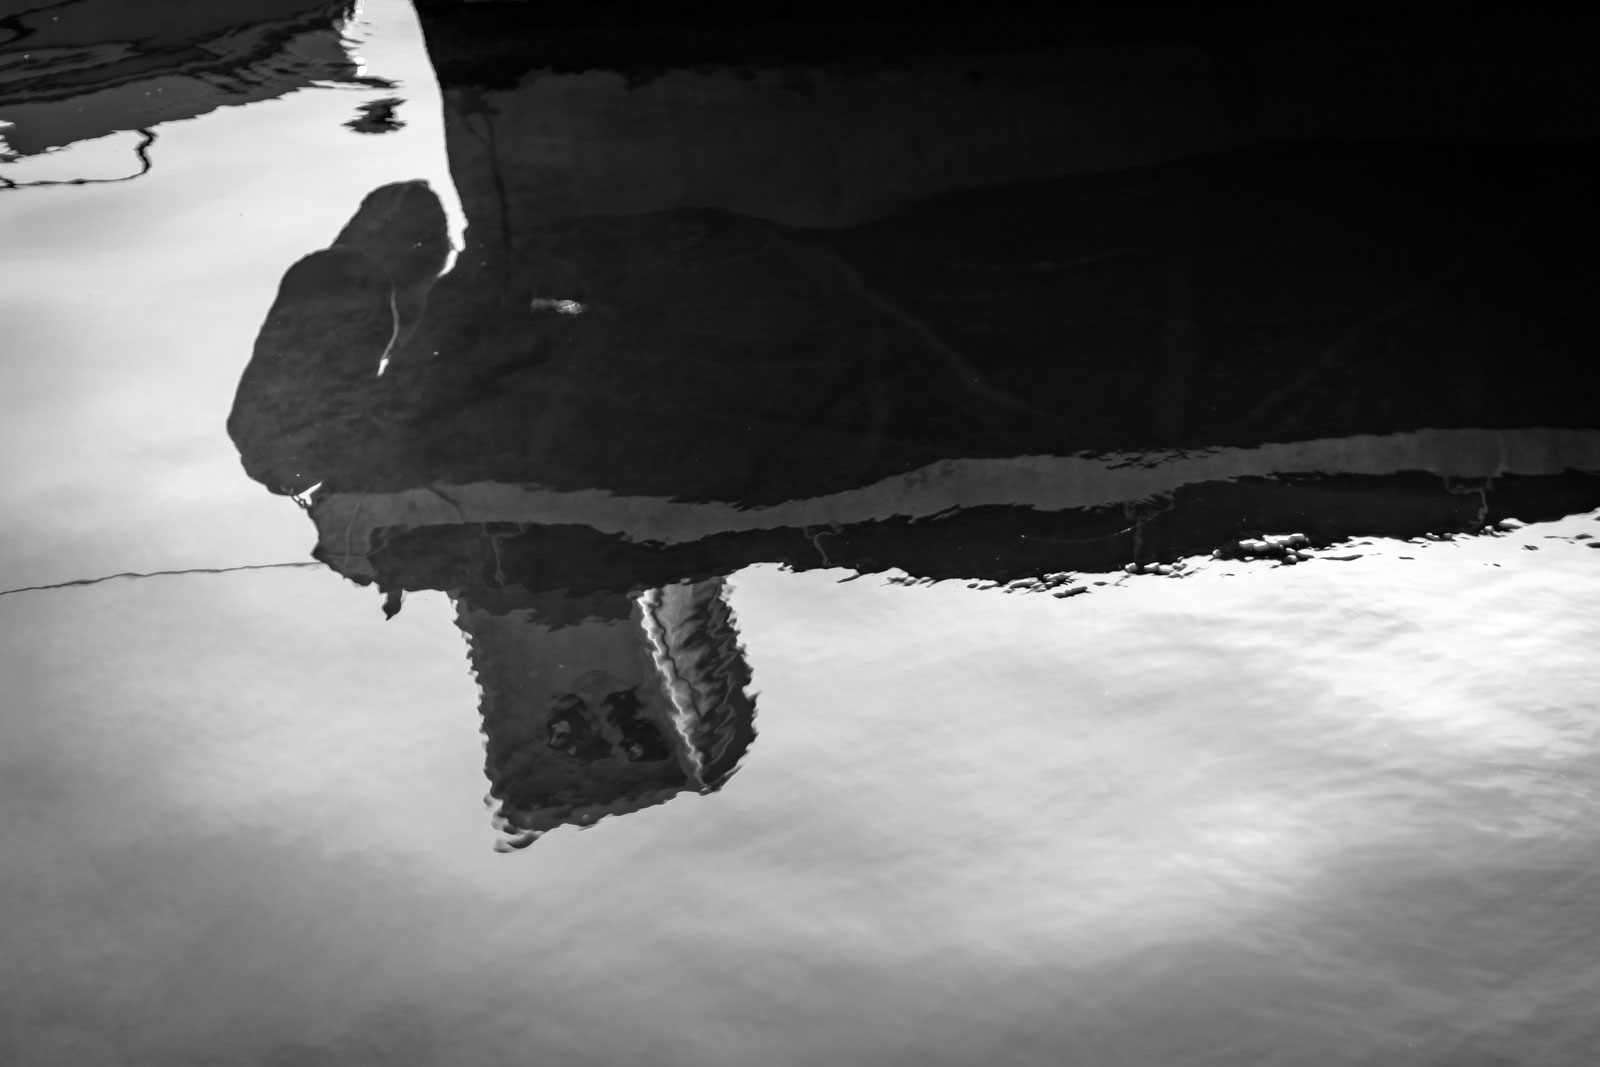 Adriatic Sea and the shadow of a boat